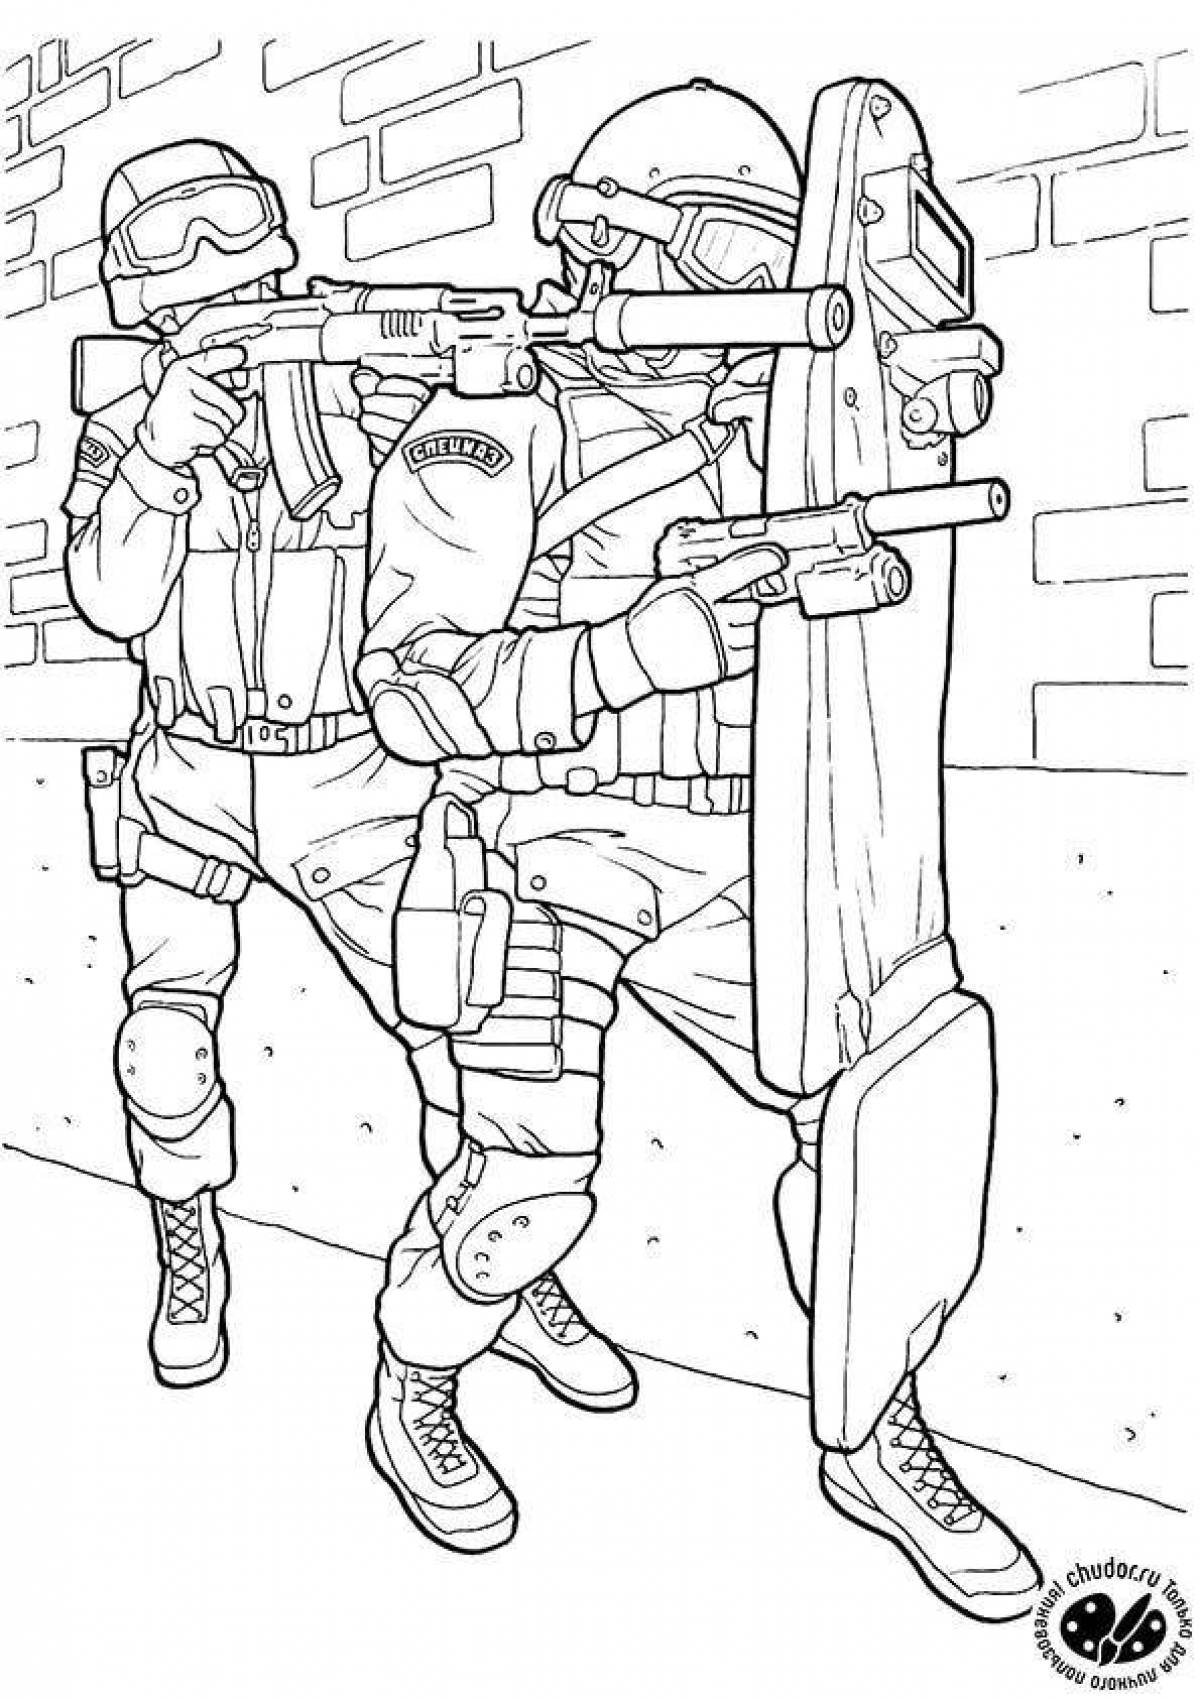 Exciting riot gas coloring page